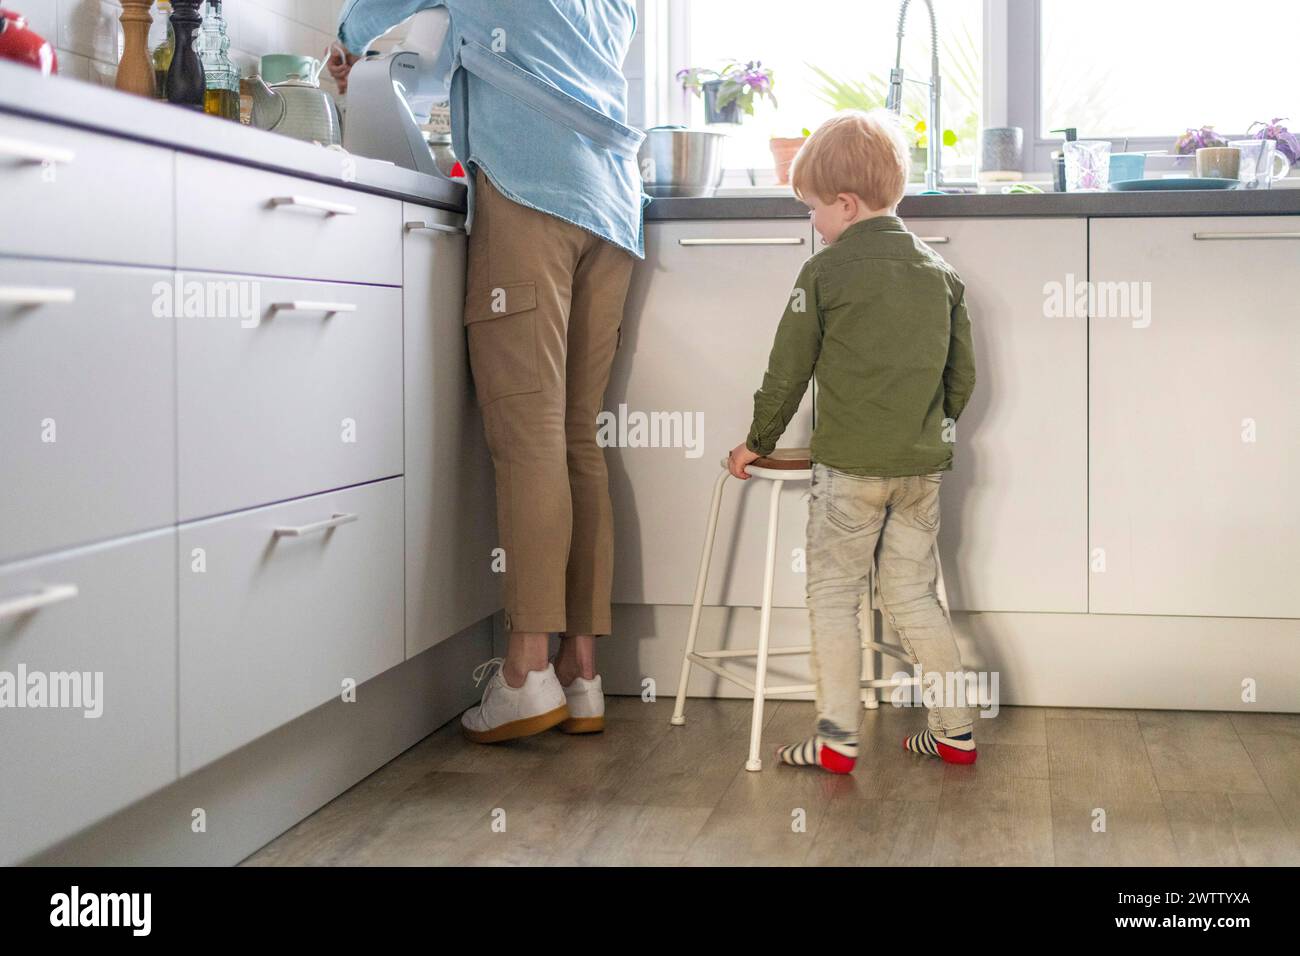 A child helping in the kitchen standing next to an adult at the counter. Stock Photo